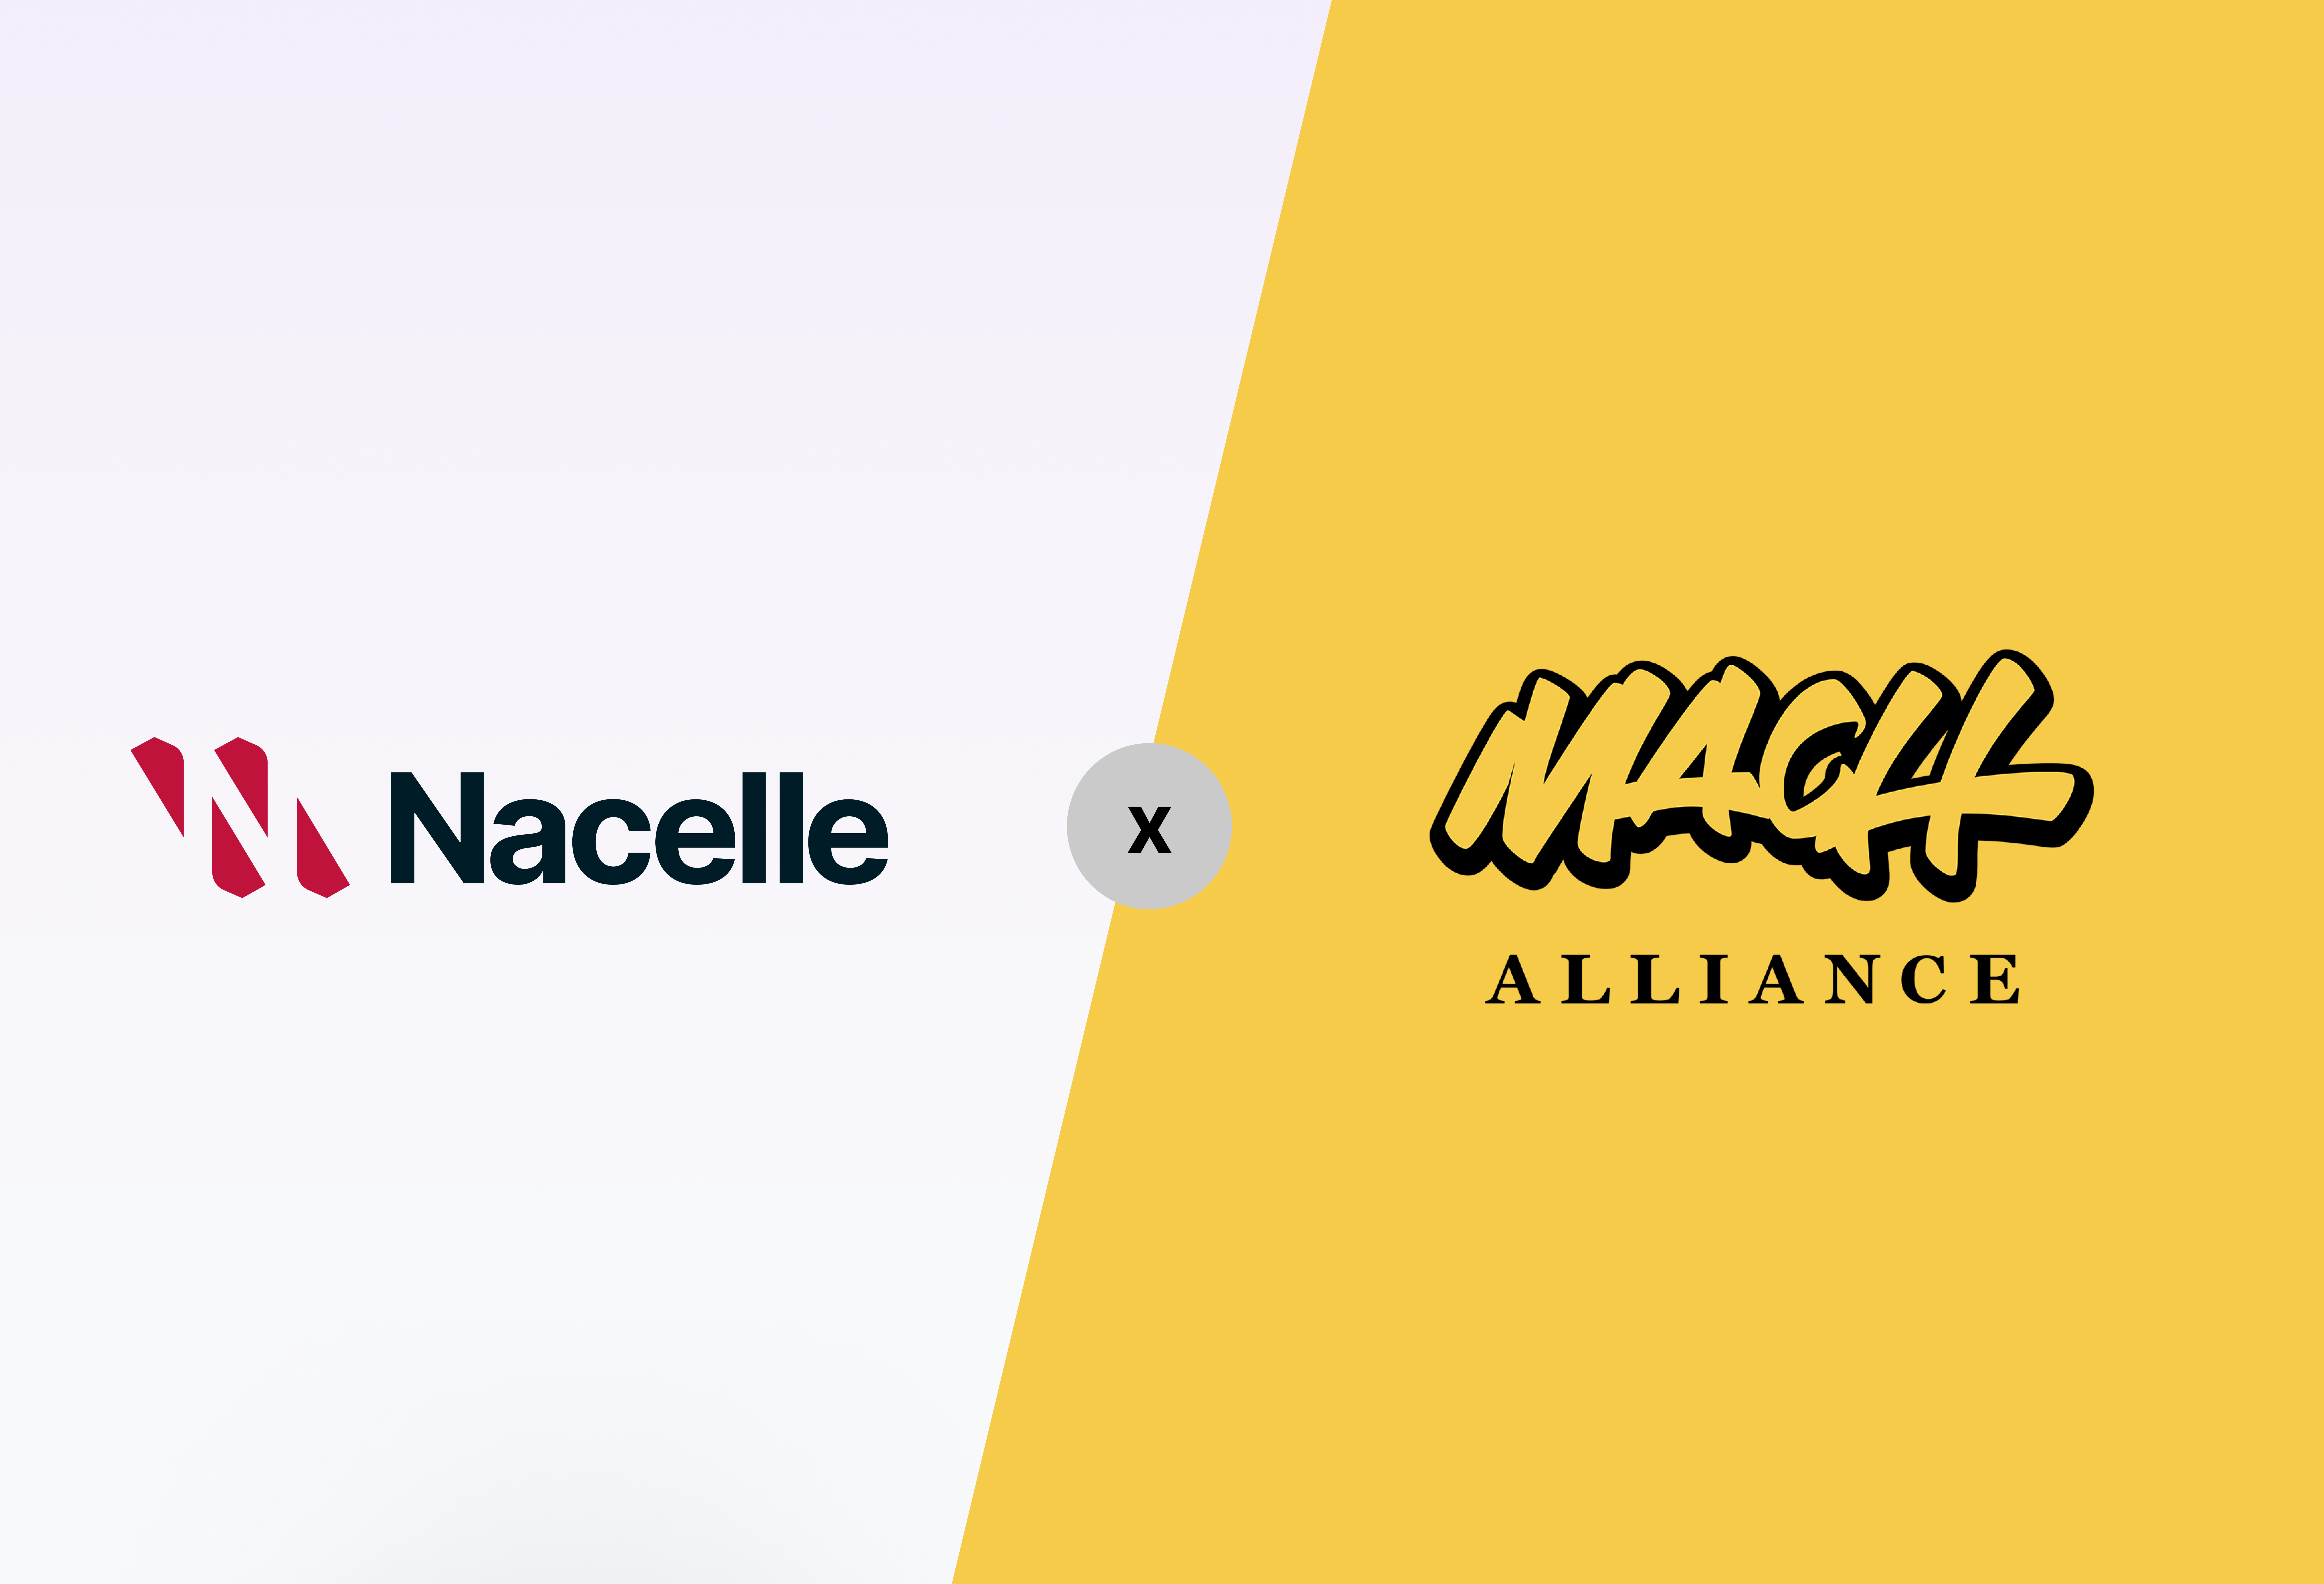  Nacelle joins the MACH alliance 